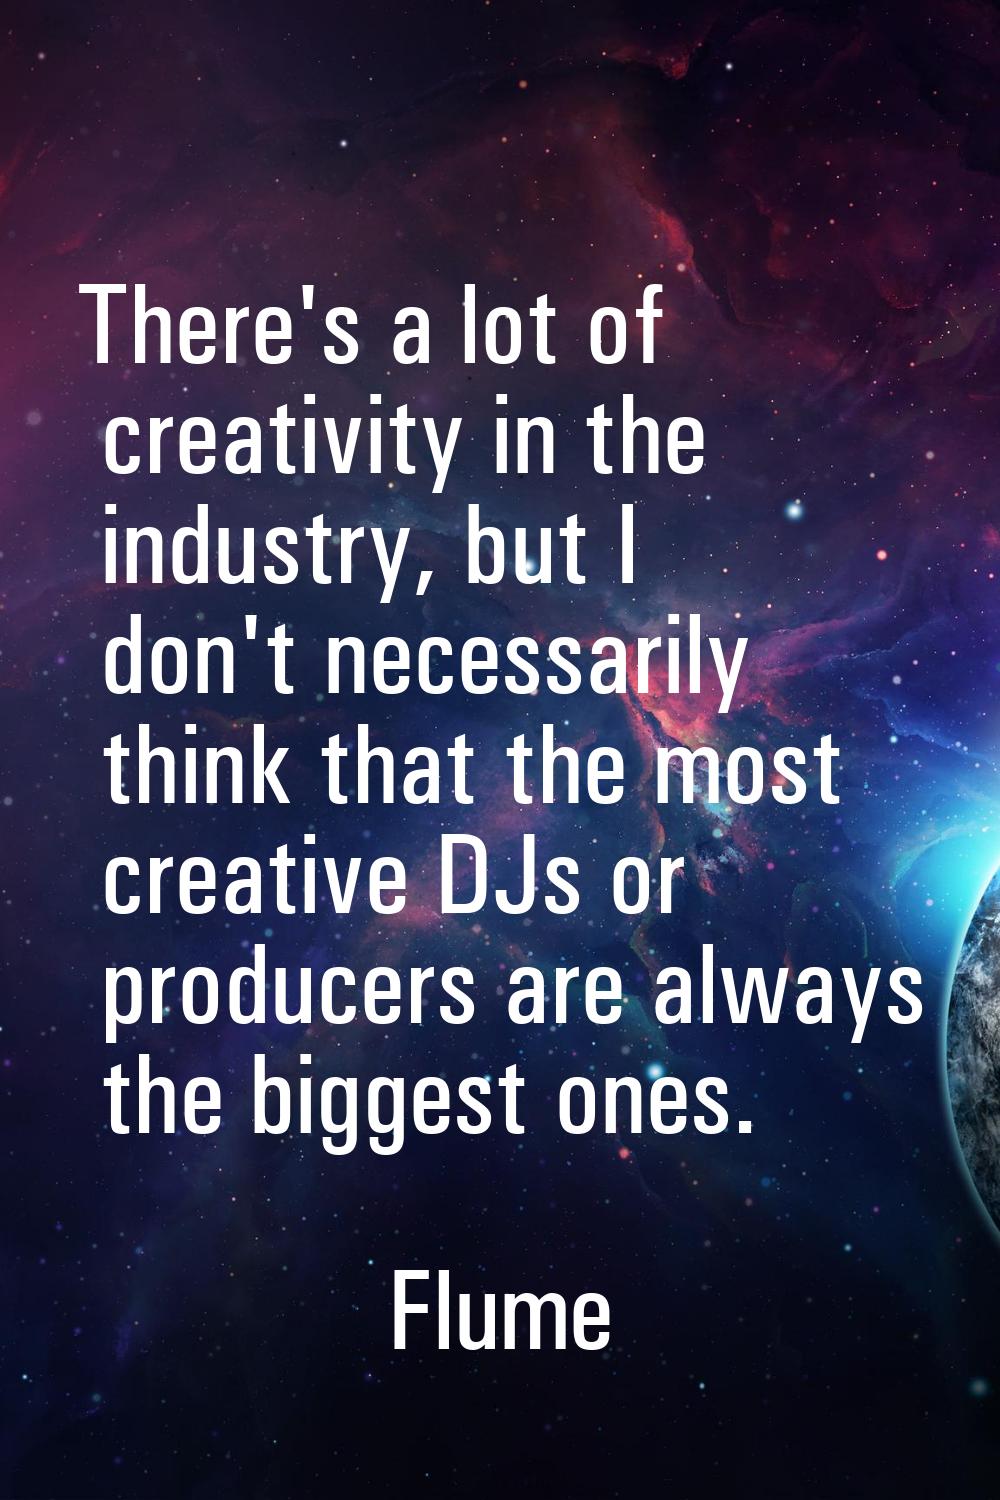 There's a lot of creativity in the industry, but I don't necessarily think that the most creative D